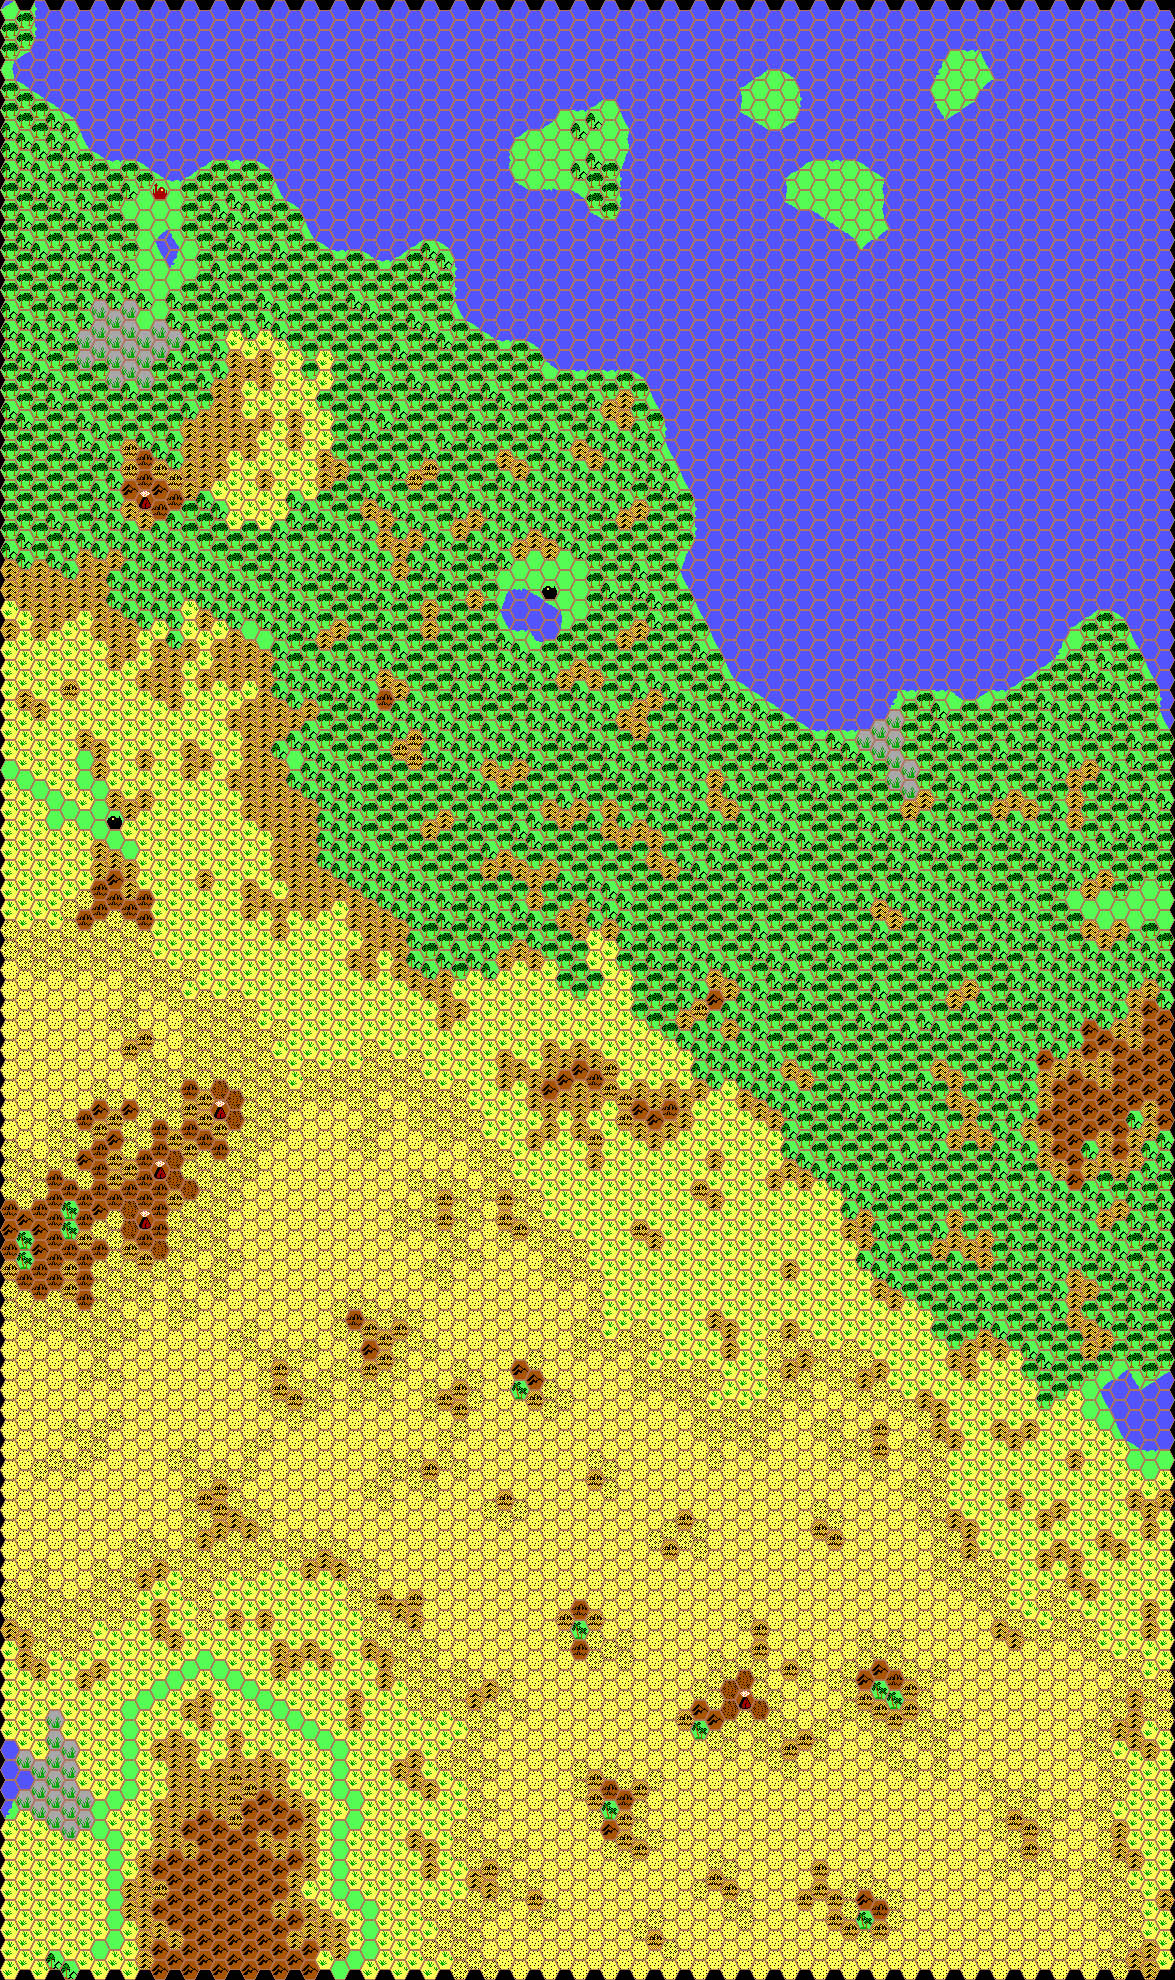 Work-in-progress map of the Jungle Coast, 24 miles per hex by Thibault Sarlat, March 2001